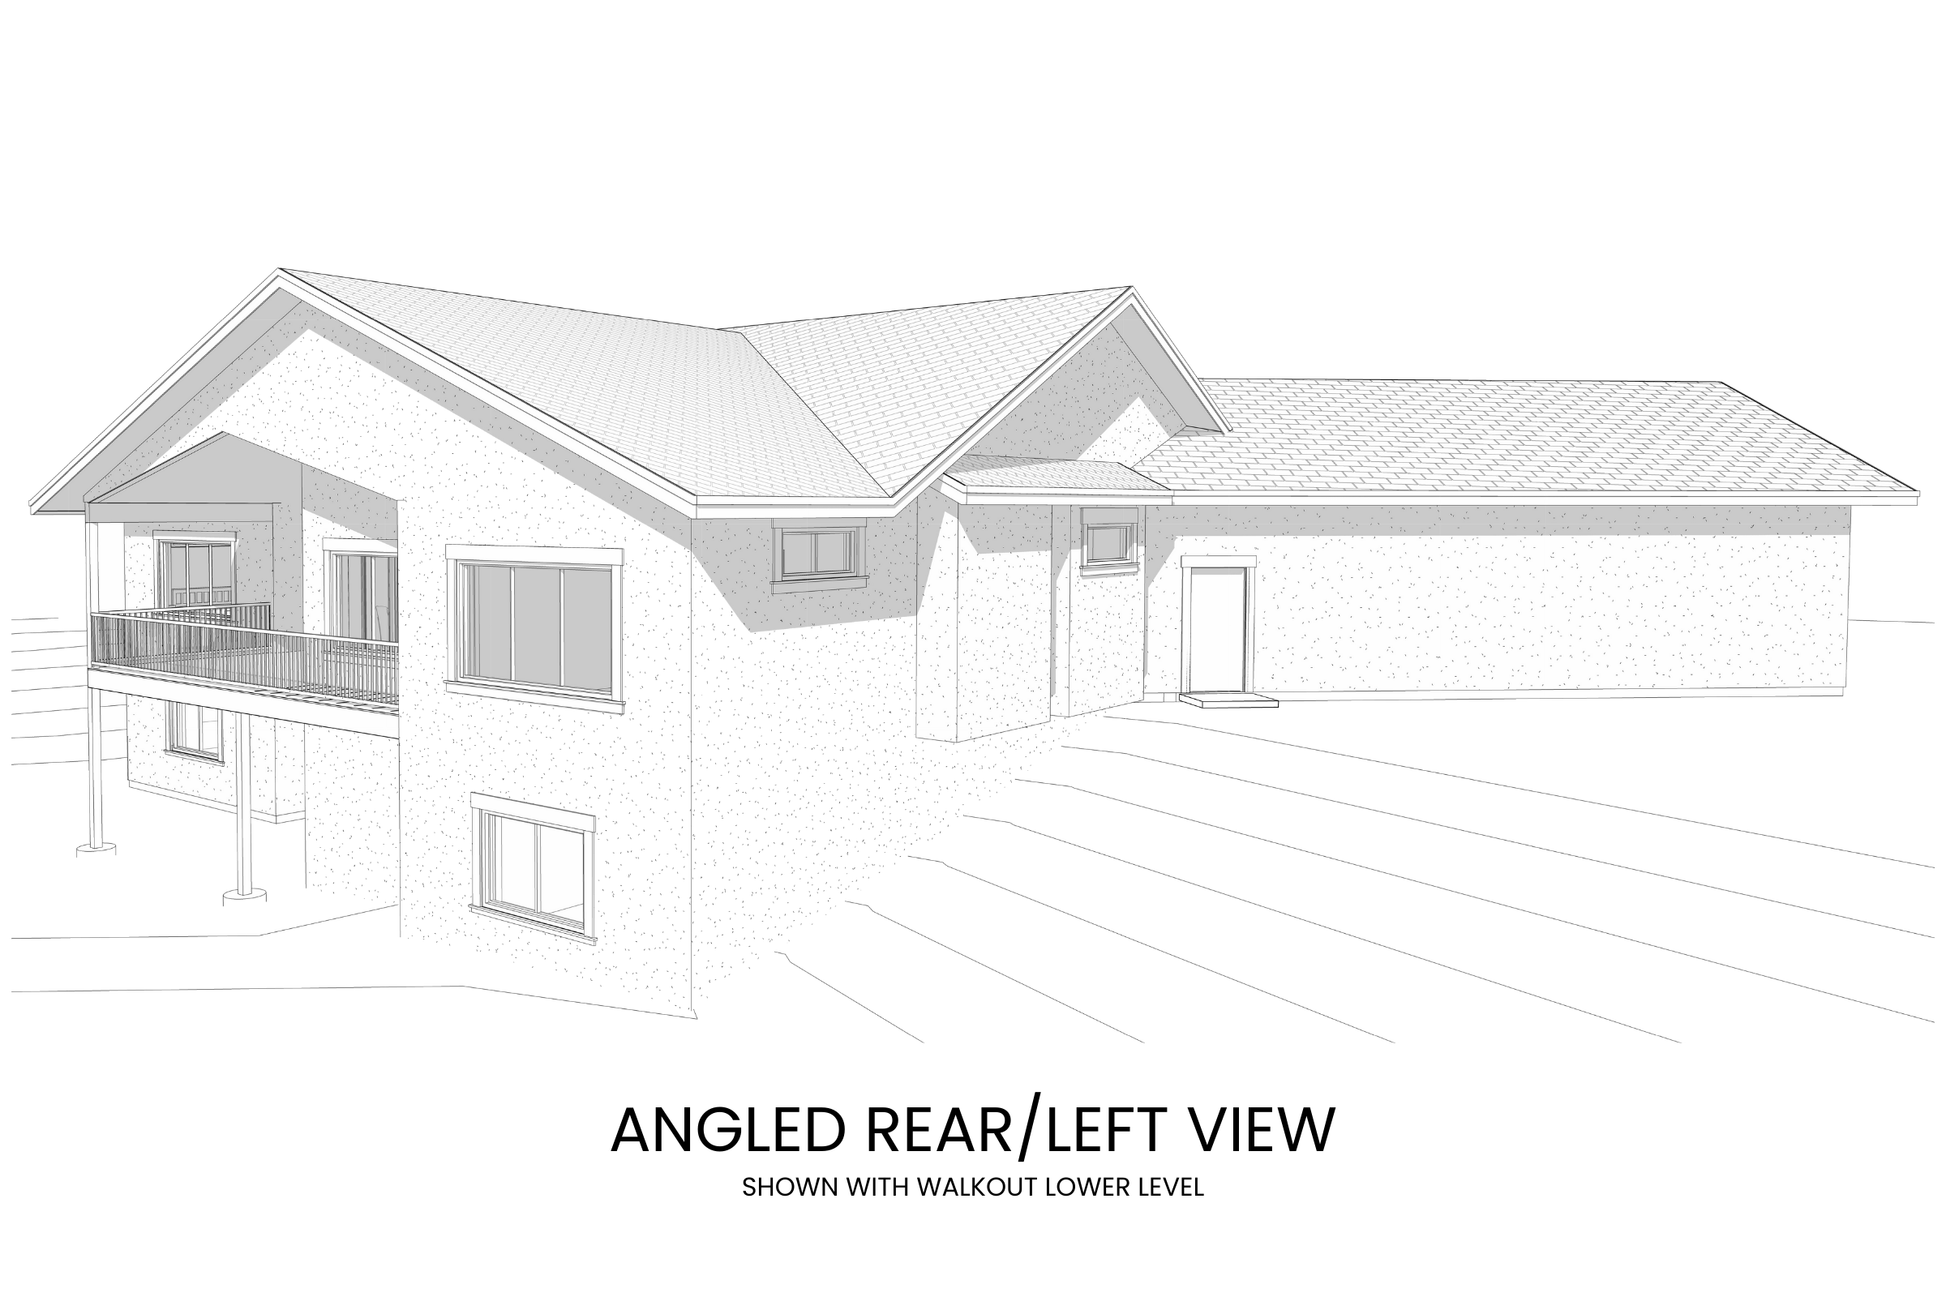 Three-Bedroom-Open-Floor-Plan-with-Lower-Level-Expansion-Rear-Left-View-Rocky-Mountain-Plan-Company-Dudley-Lake